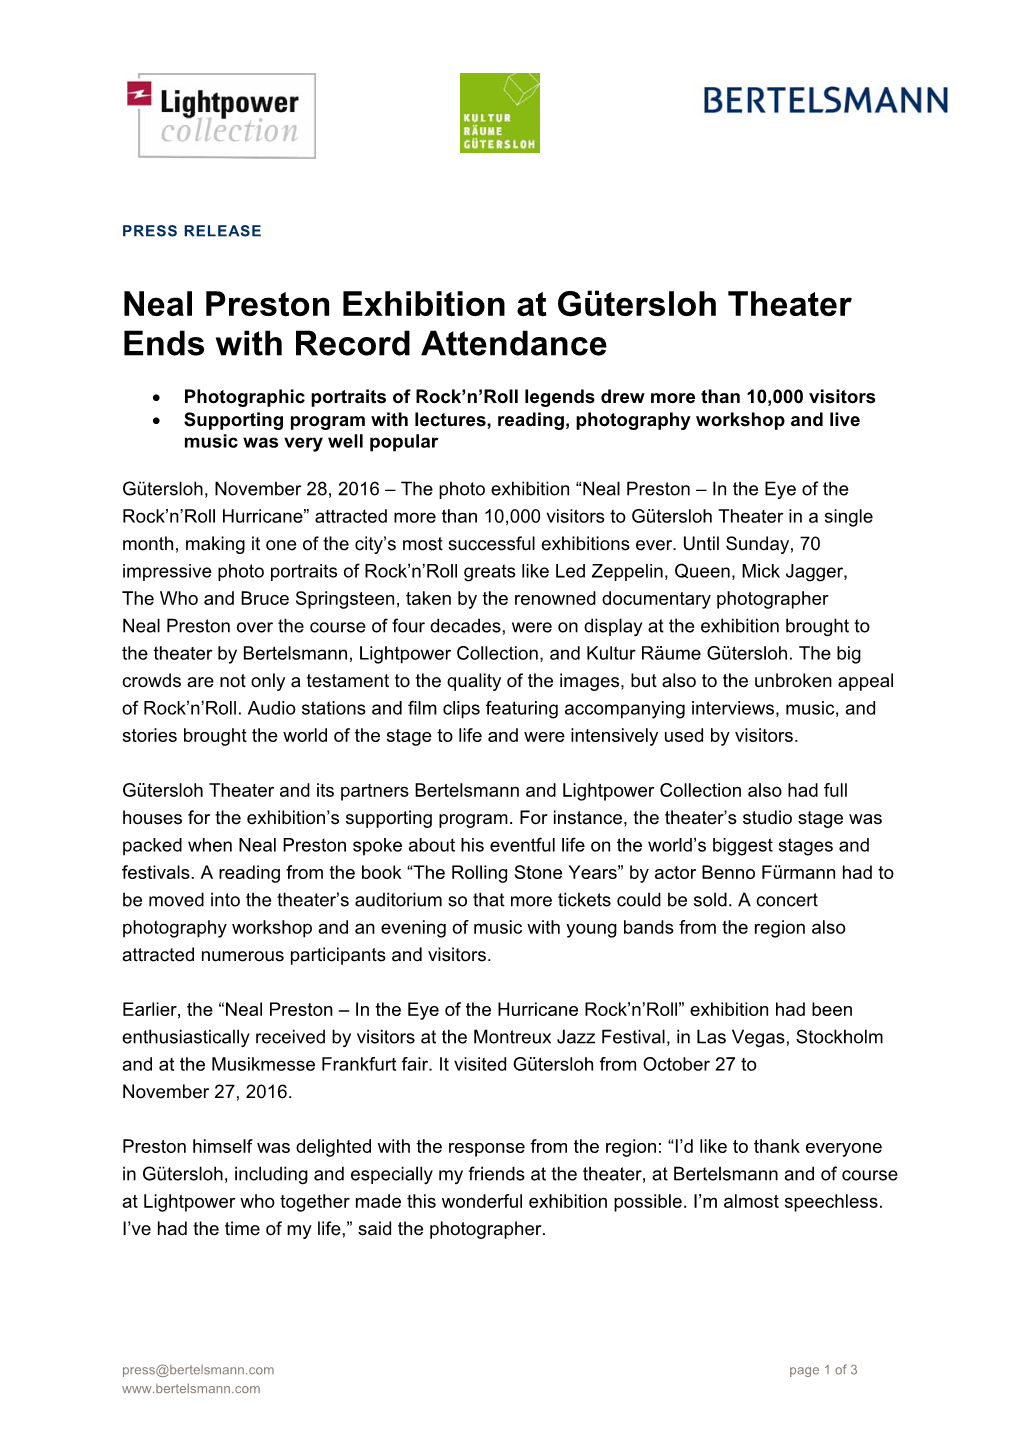 Neal Preston Exhibition at Gütersloh Theater Ends with Record Attendance